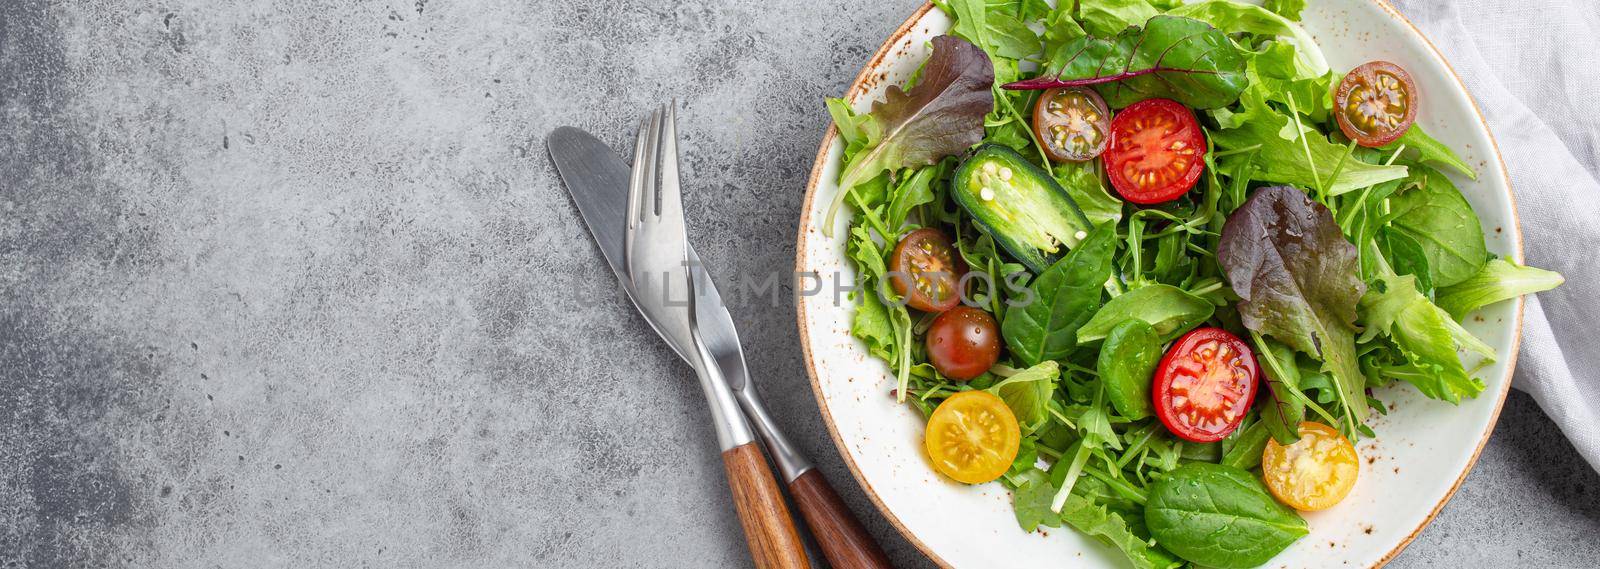 Vegetables healthy salad with red and yellow cherry tomatoes, pepper and green salad leafs on white rustic ceramic plate by its_al_dente